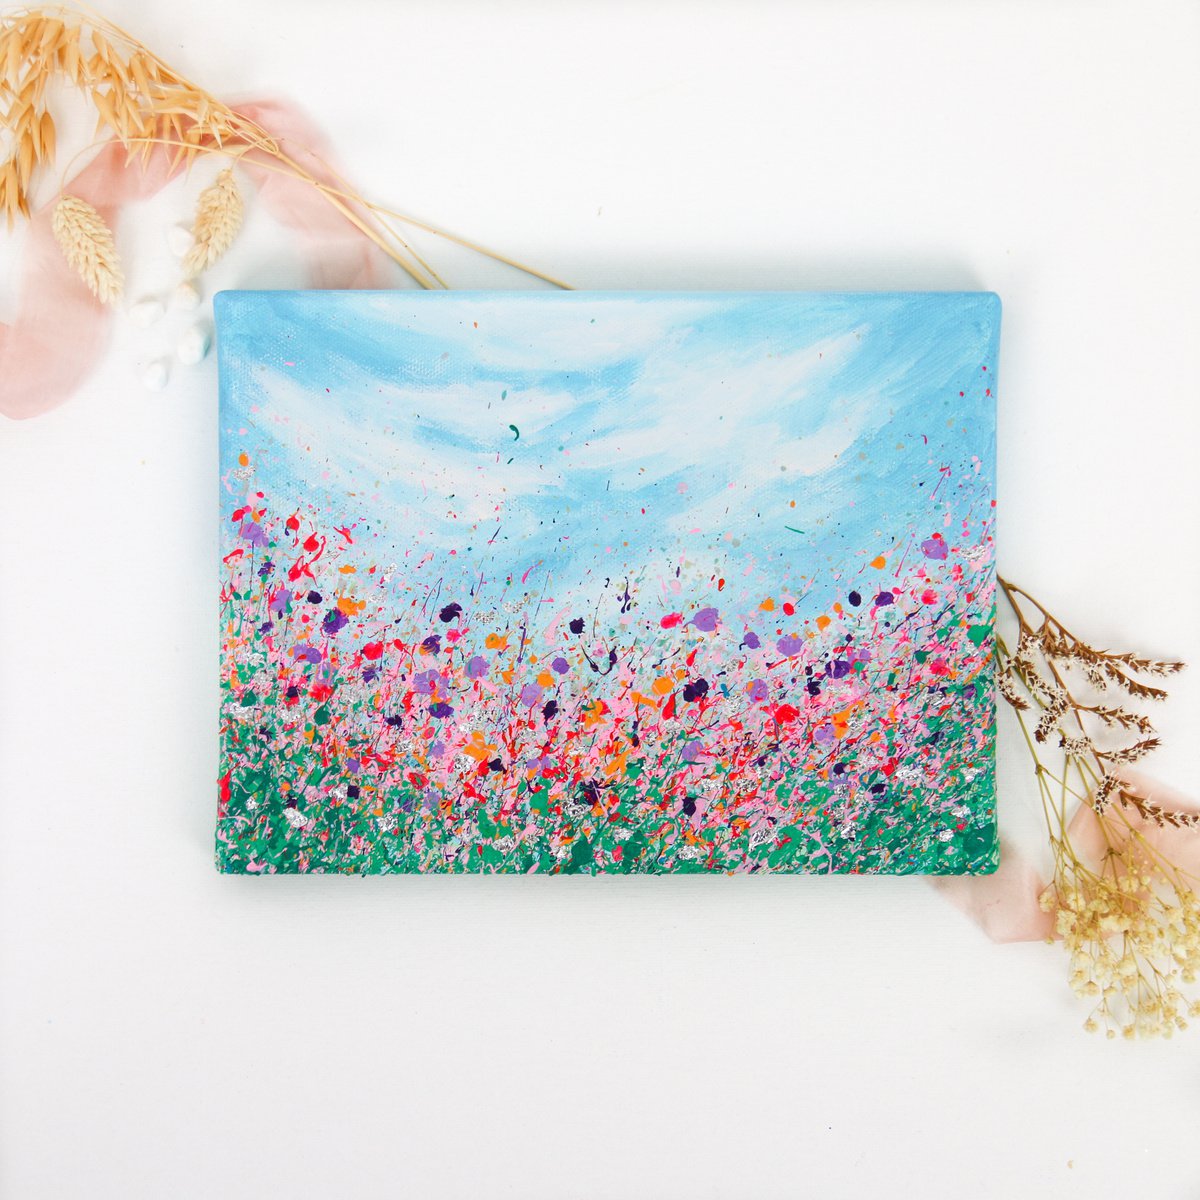 Happy Spring Bloom - Small Original Painting by Shazia Basheer